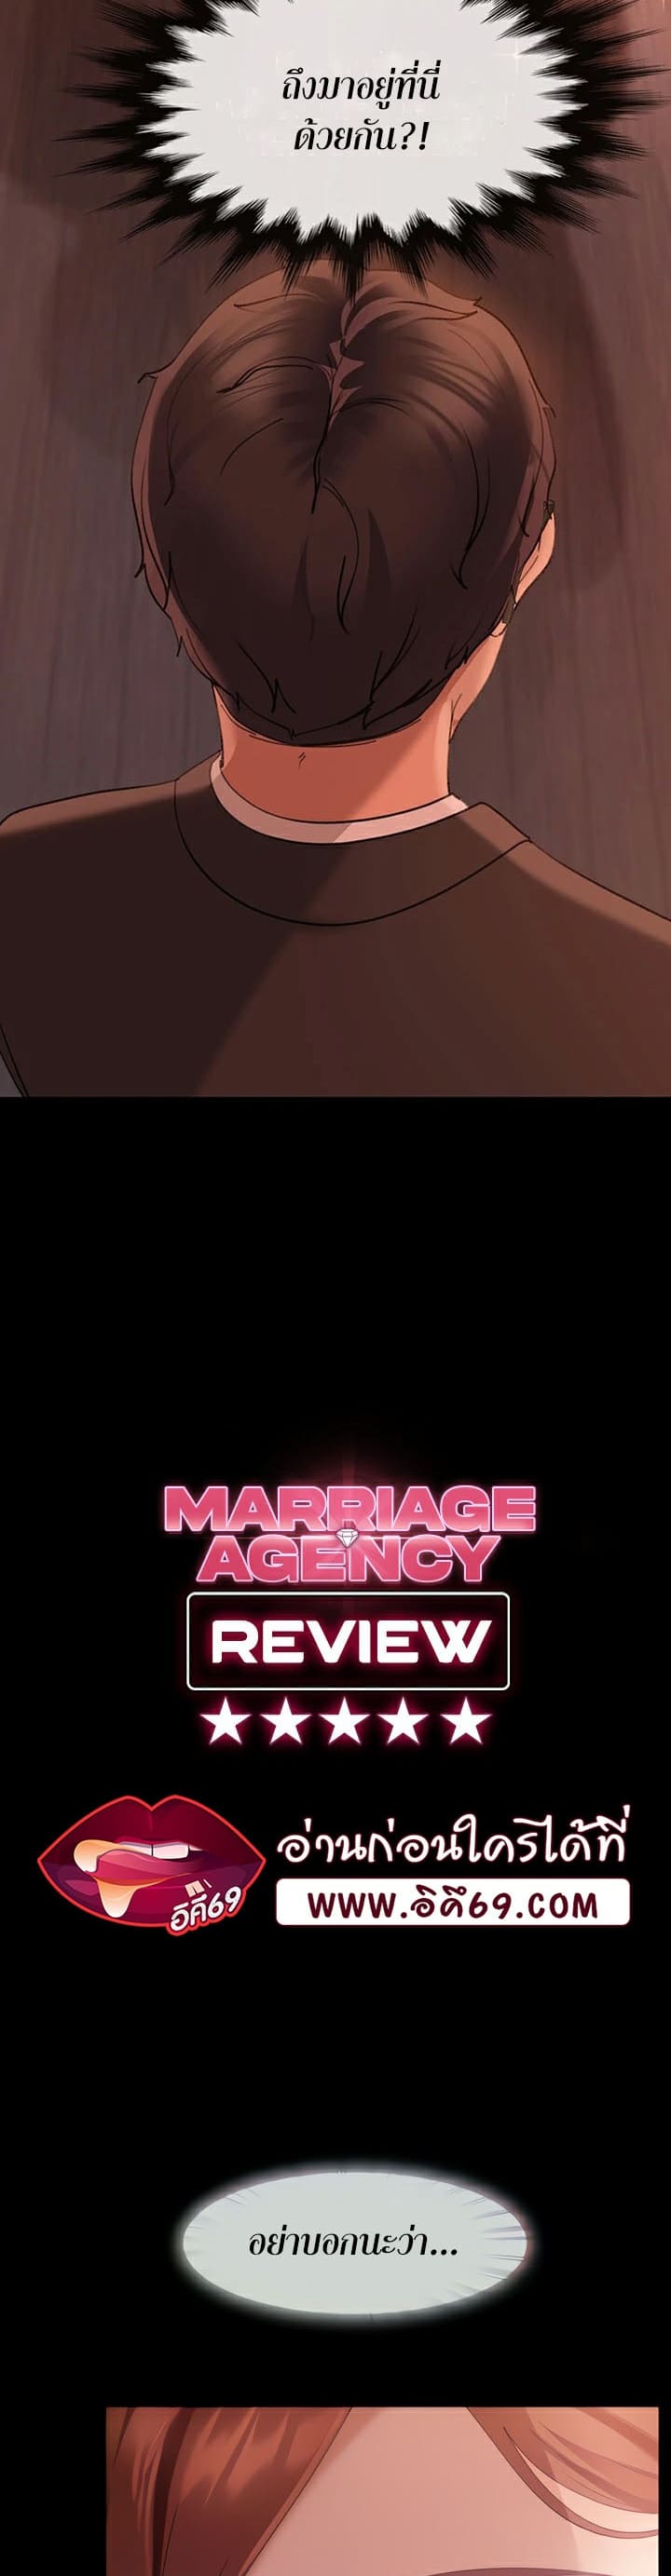 Marriage Agency Review ตอนที่ 17 ภาพ 2